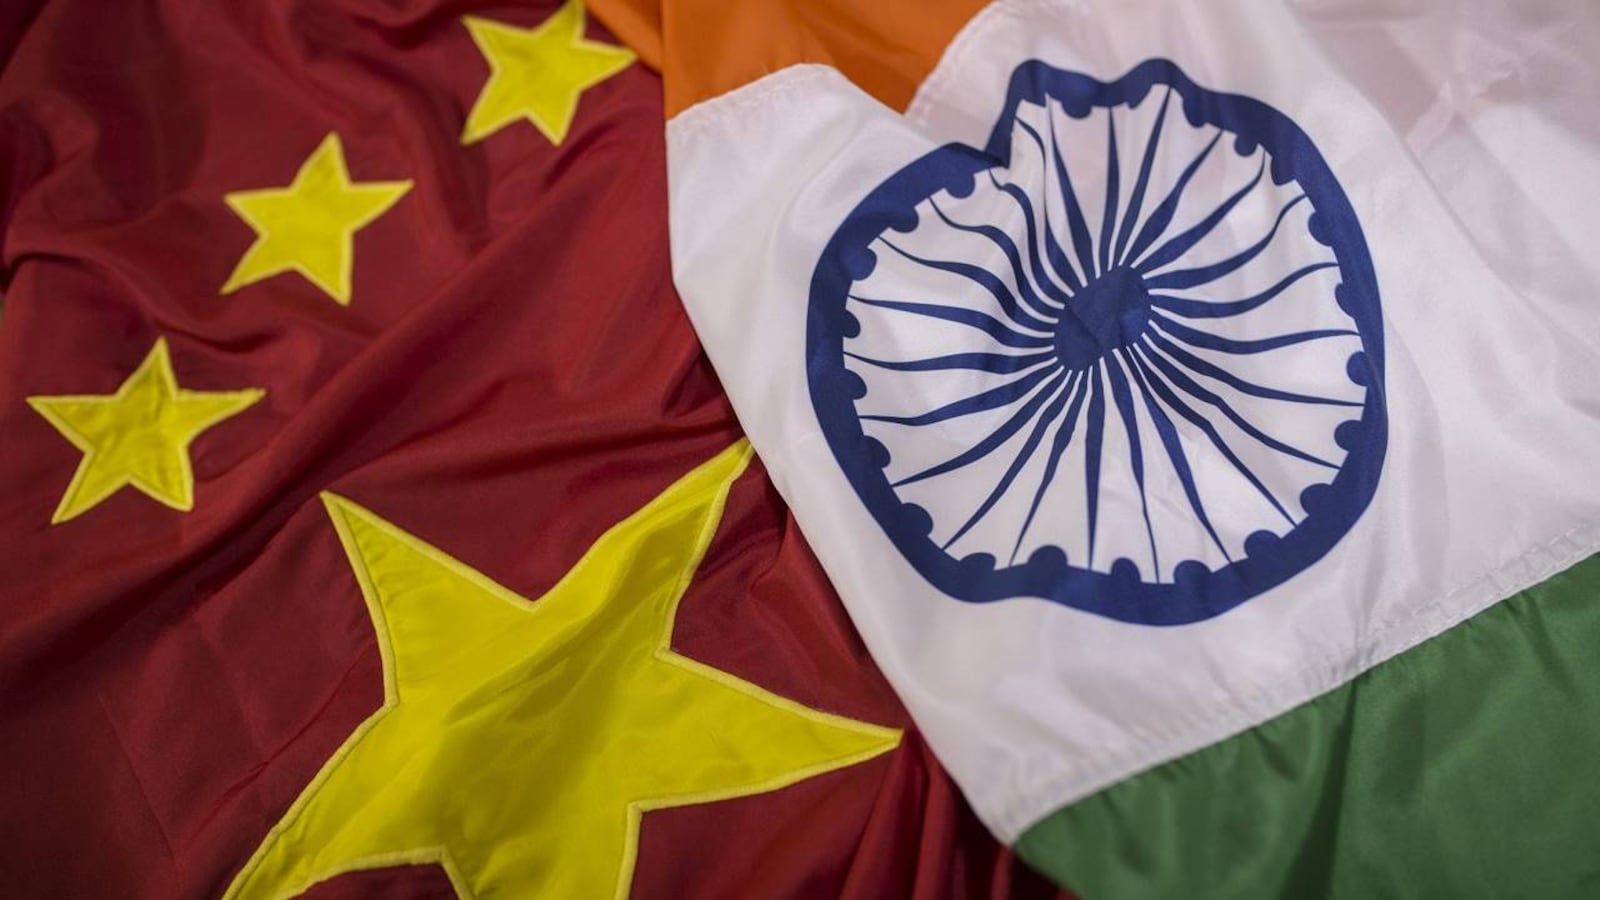 Commerce ministry recommends anti-dumping duty on Chinese glass imports